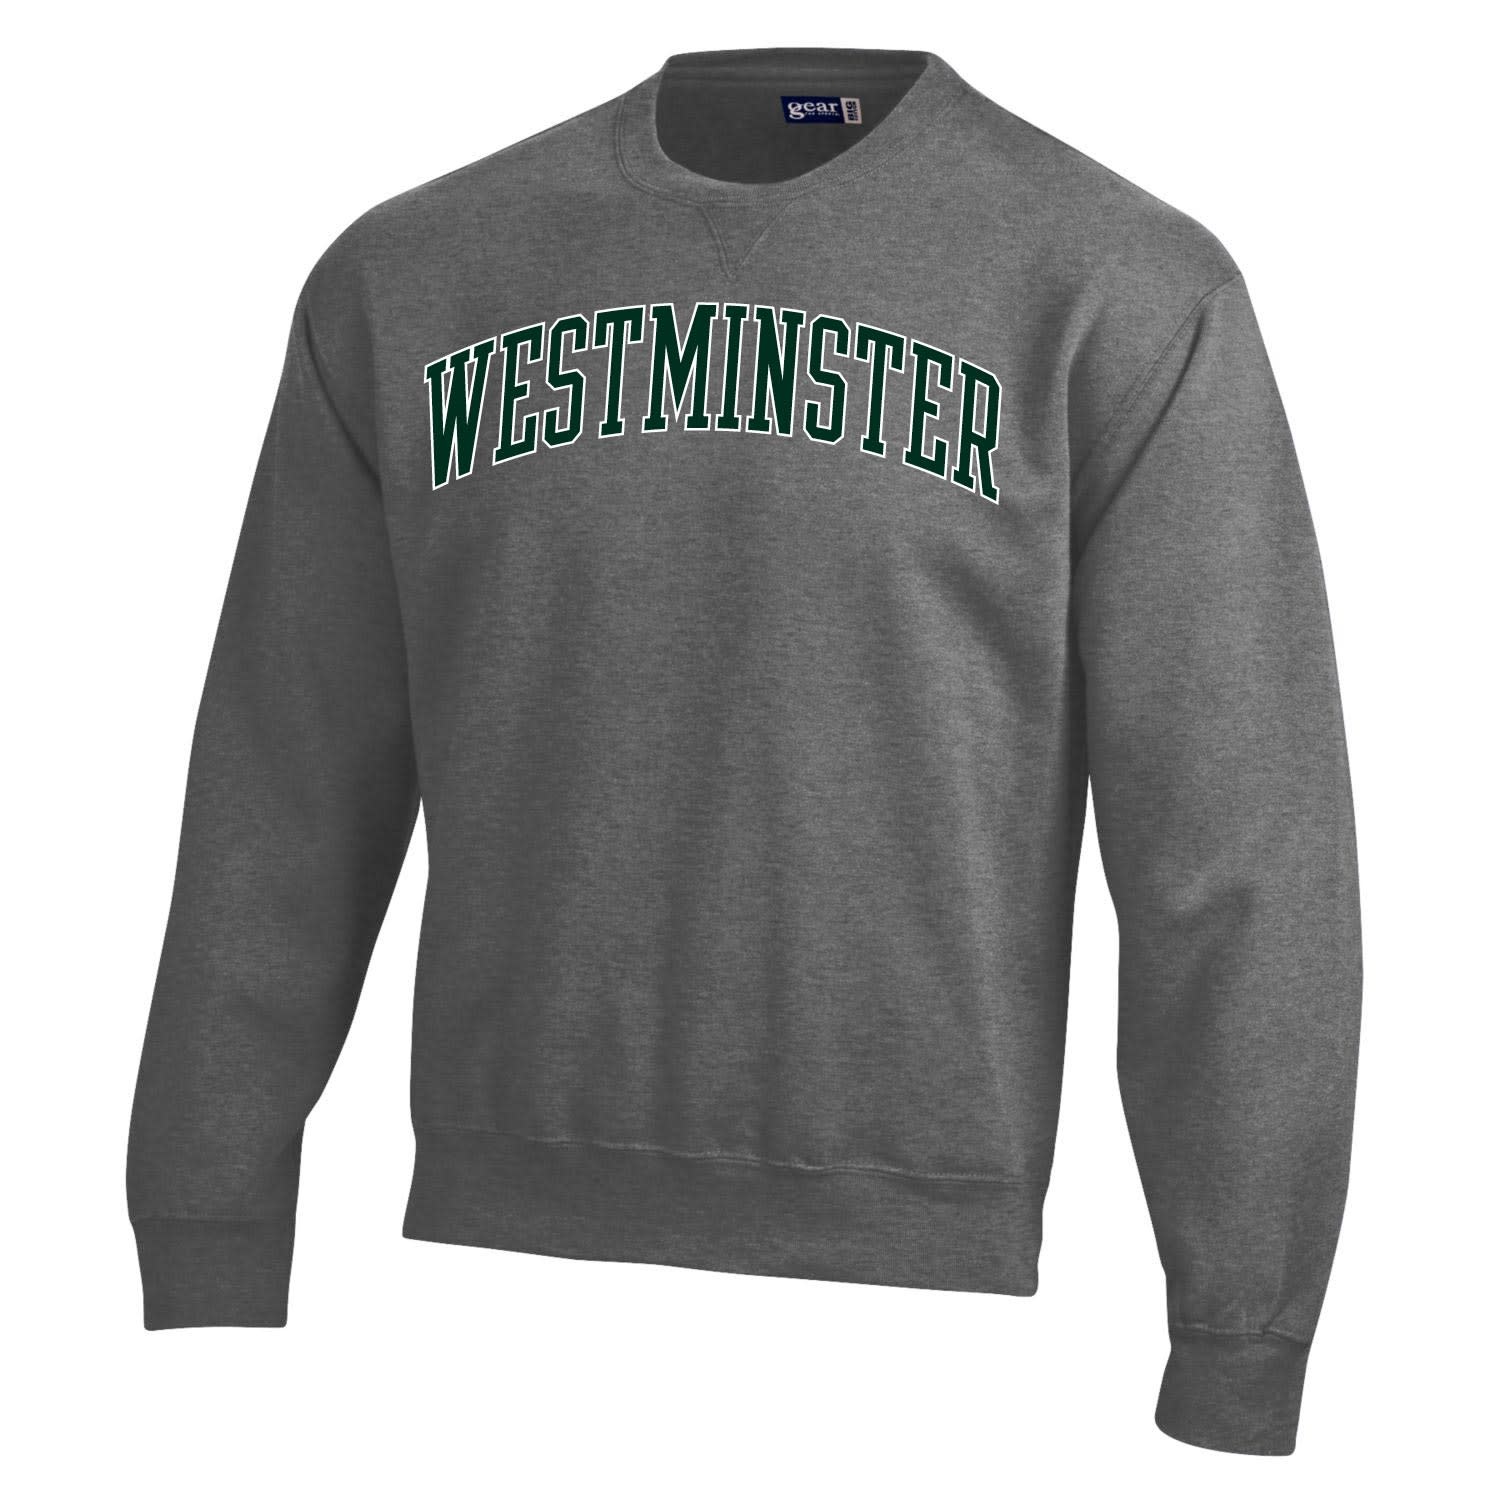 Gear for Sports Sweatshirt: Gear for Sports Big Cotton Crew - Westminster Charcoal Heather